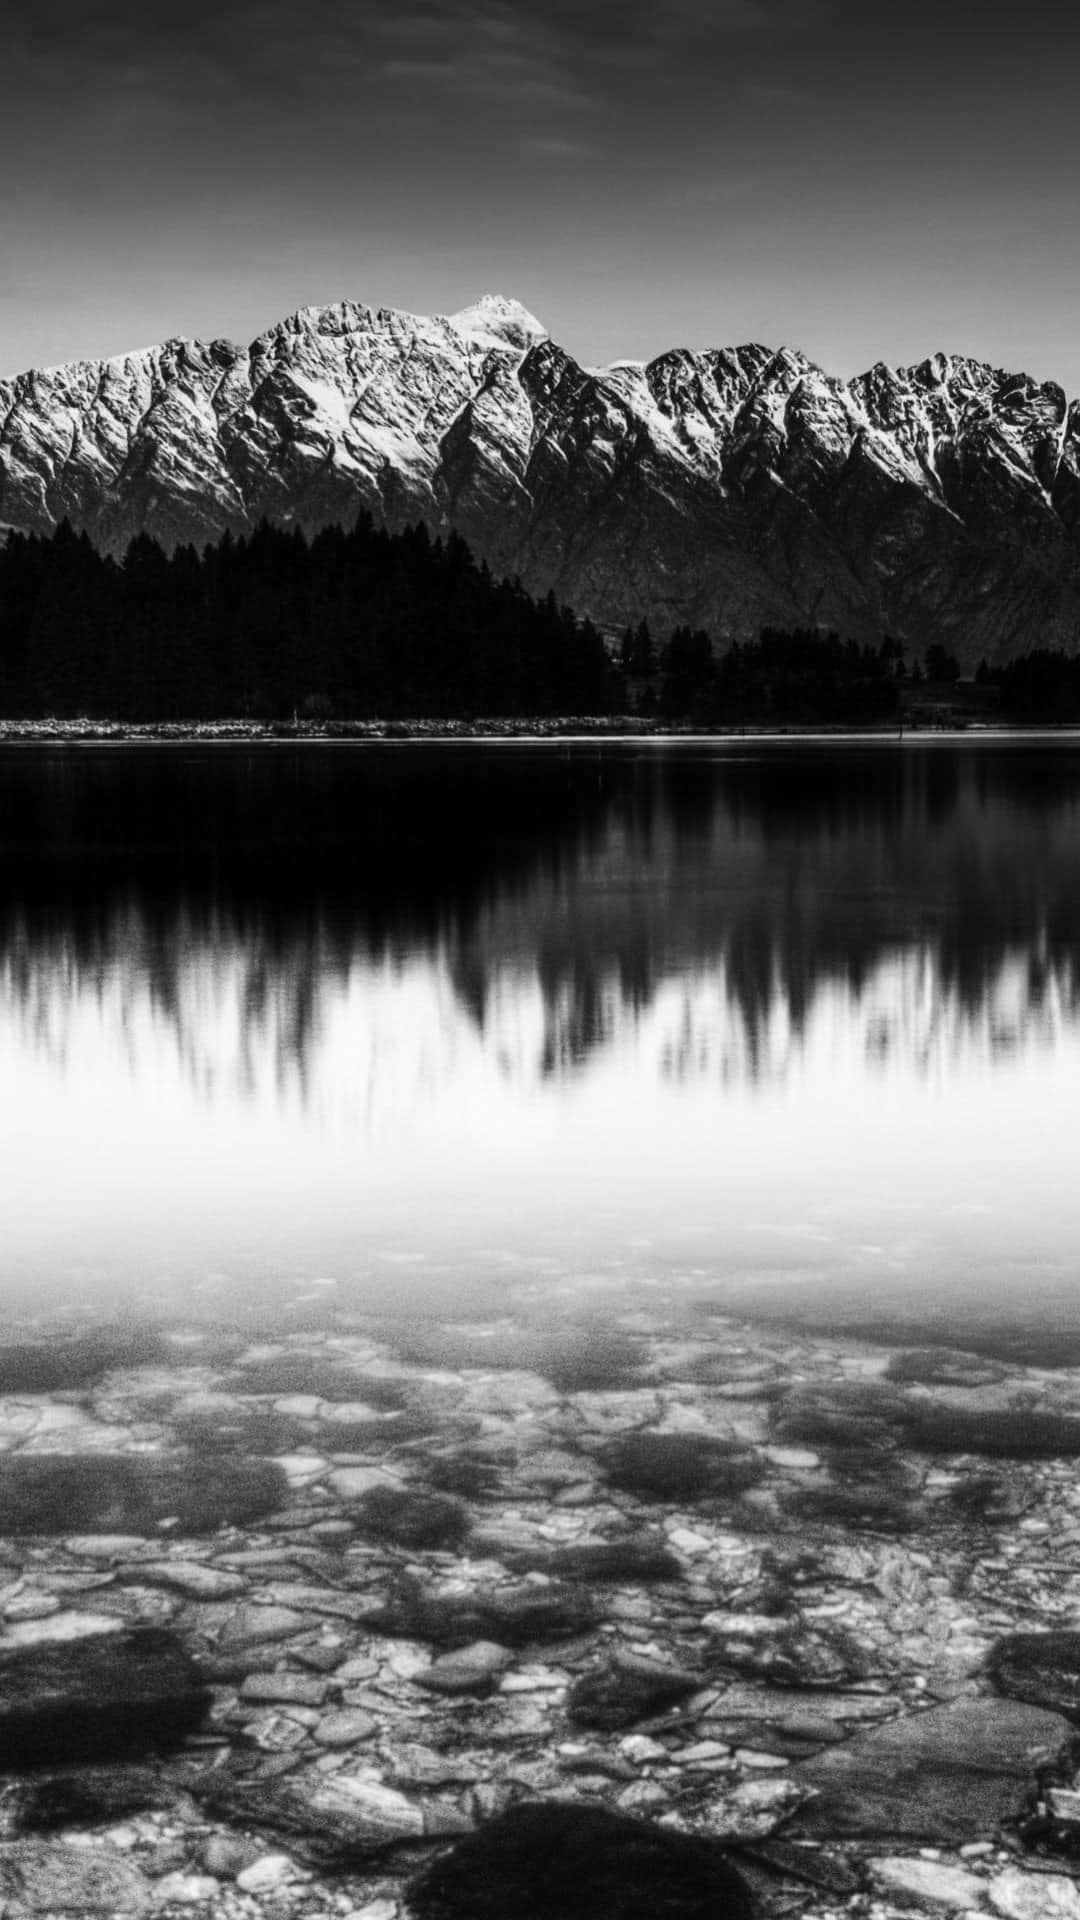 A Black And White Photo Of A Mountain Reflected In Water